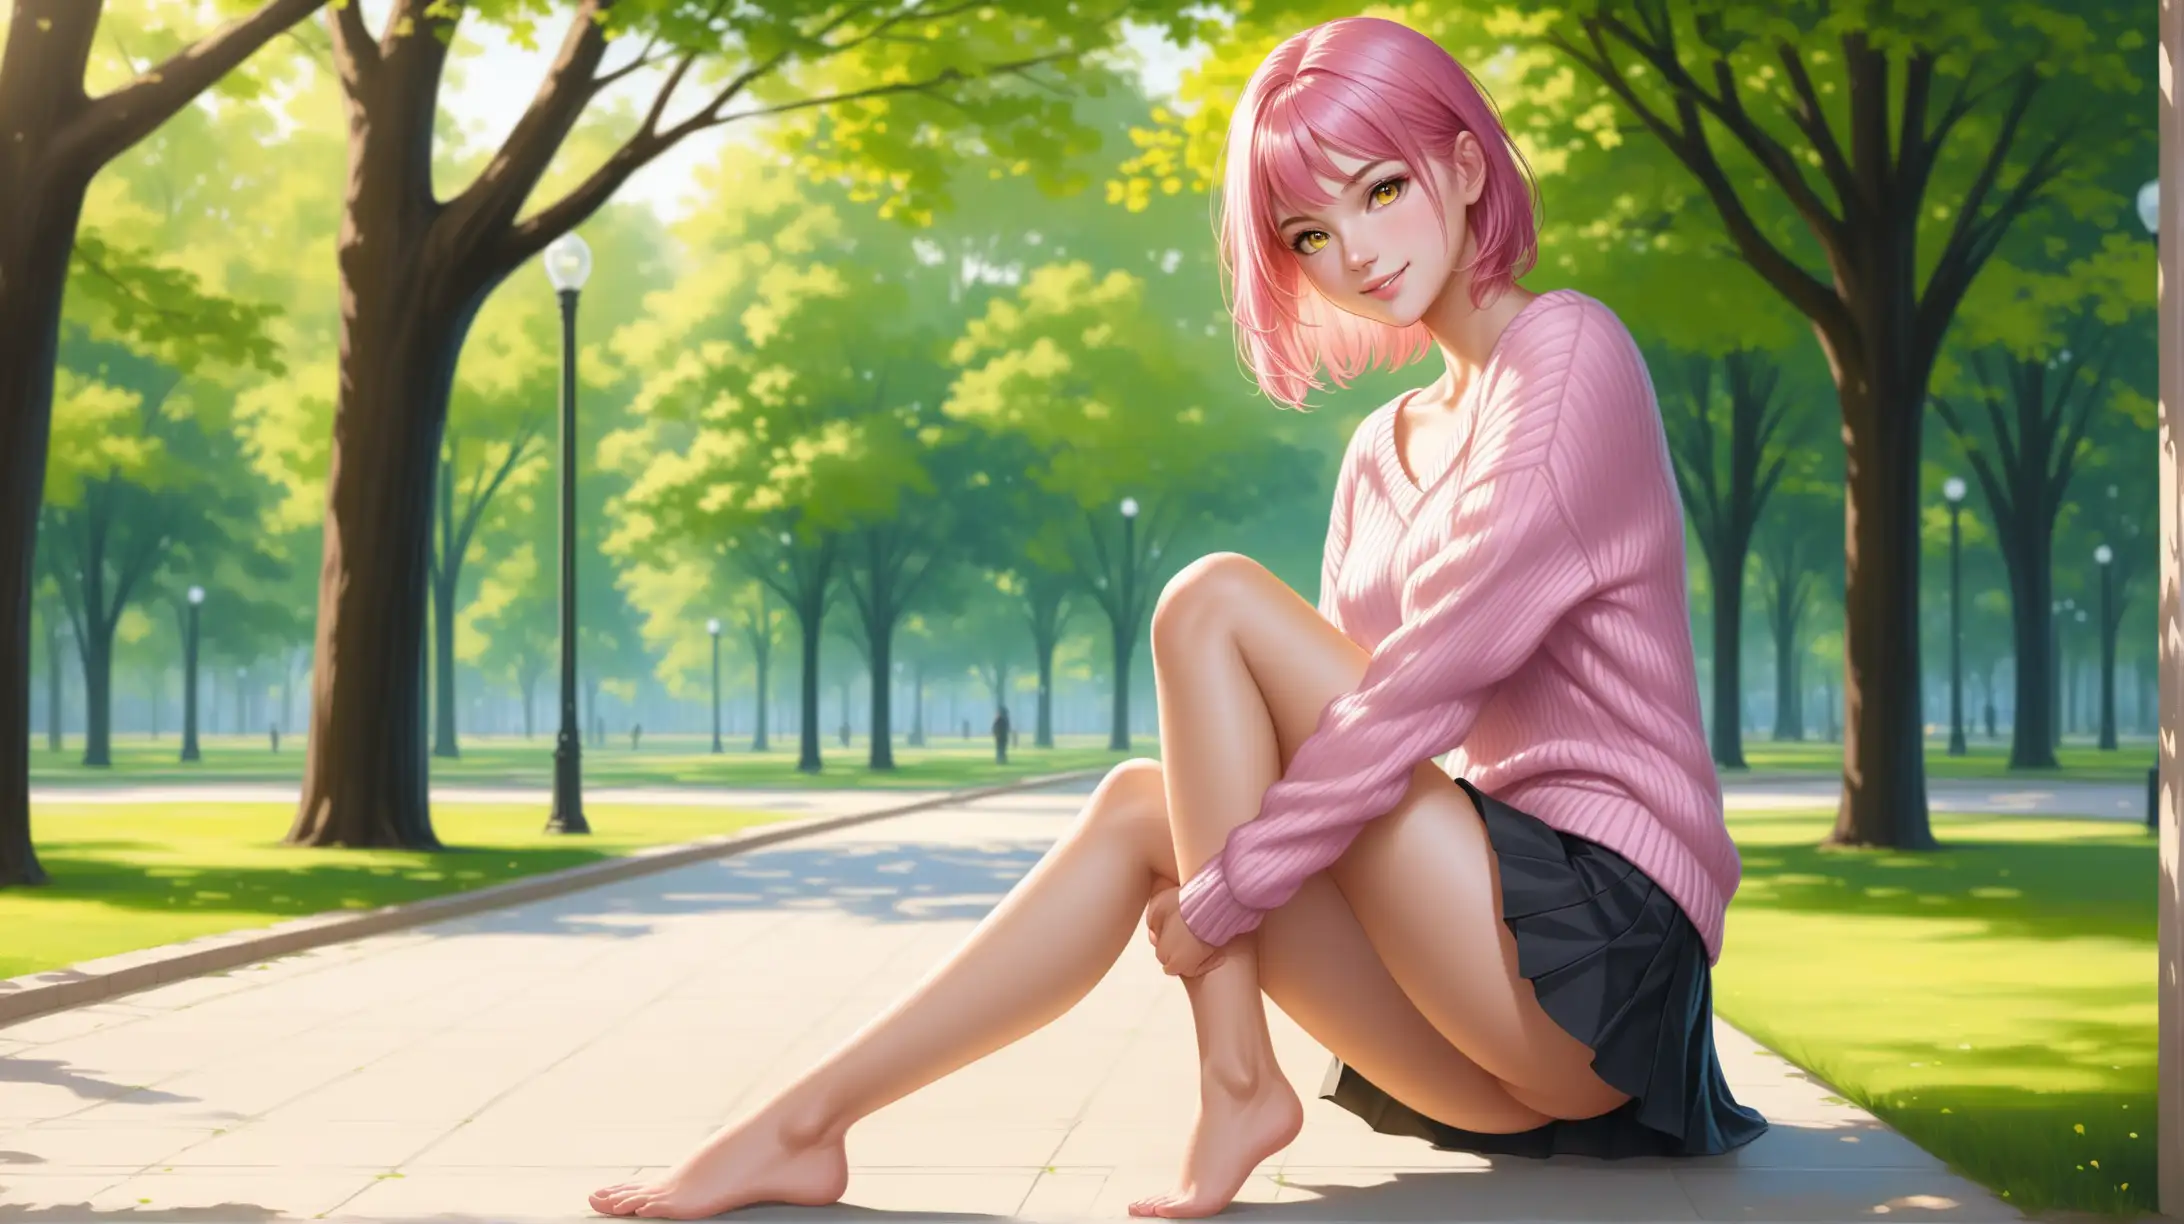 Seductive Woman with Pink Hair and Yellow Eyes in OpenChested Sweater and Skirt Smiling Outdoors